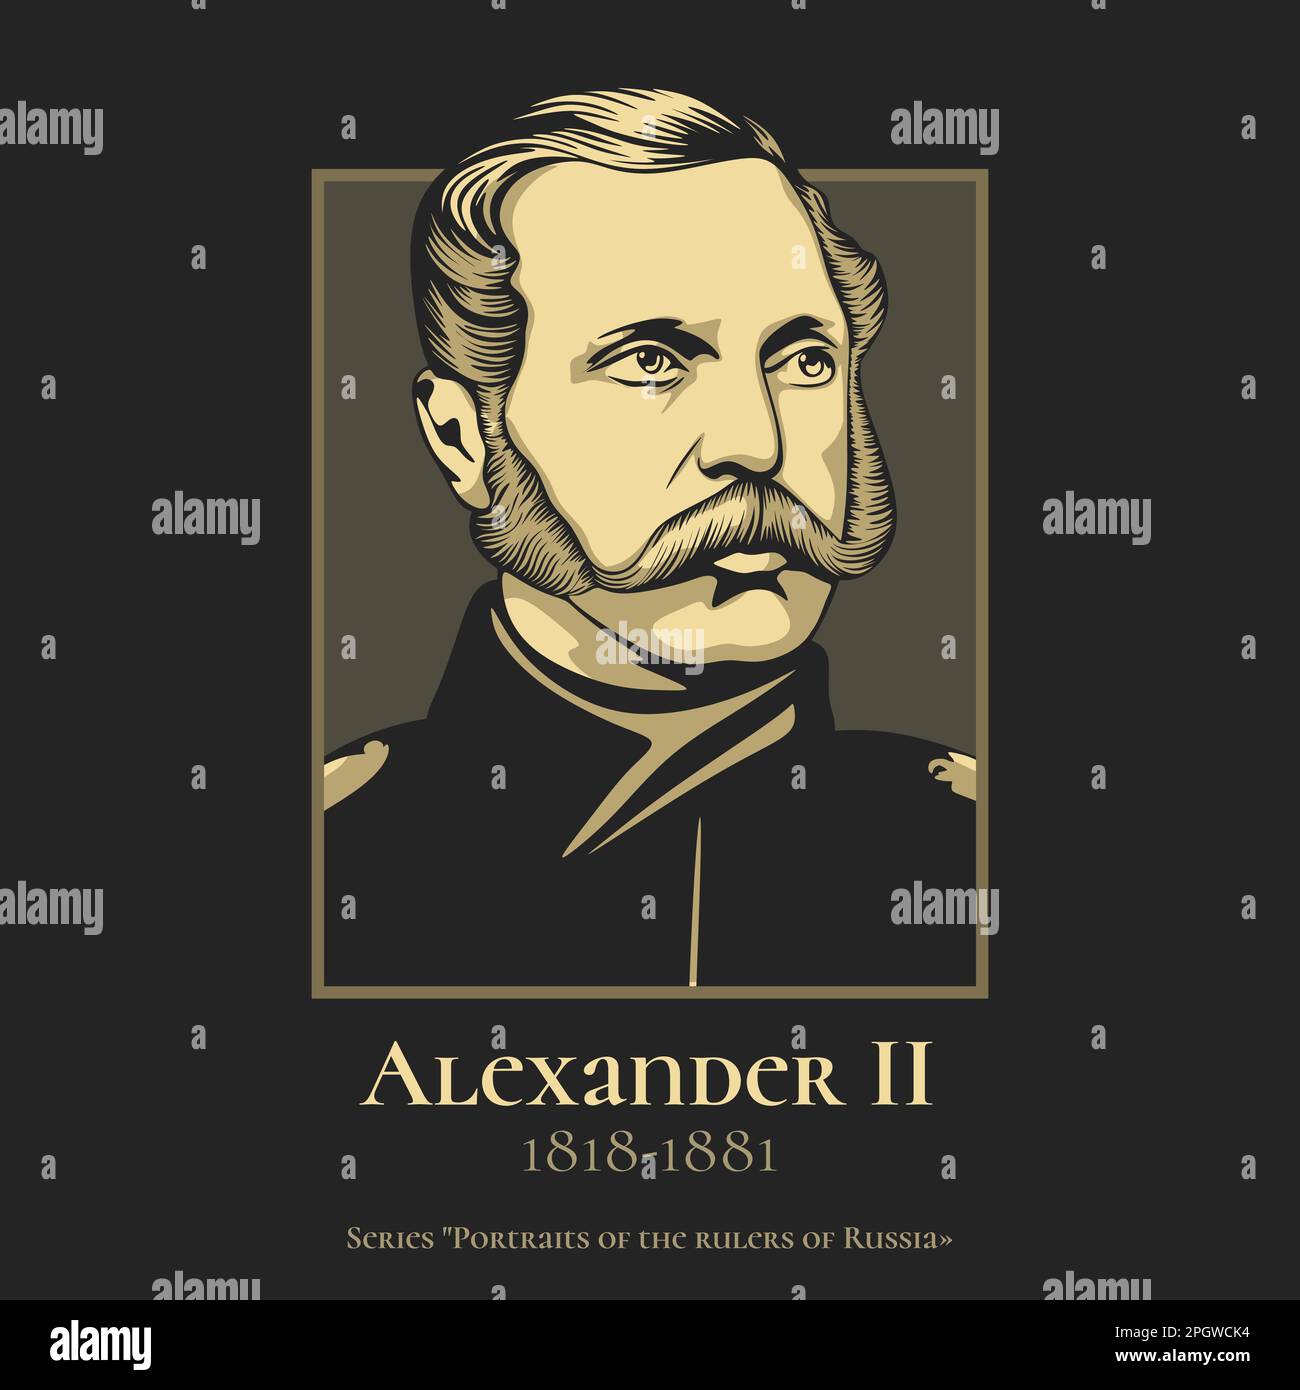 Alexander II (1818-1881) was Emperor of Russia, King of Poland and Grand Duke of Finland from 2 March 1855 until his assassination in 1881. Stock Vector